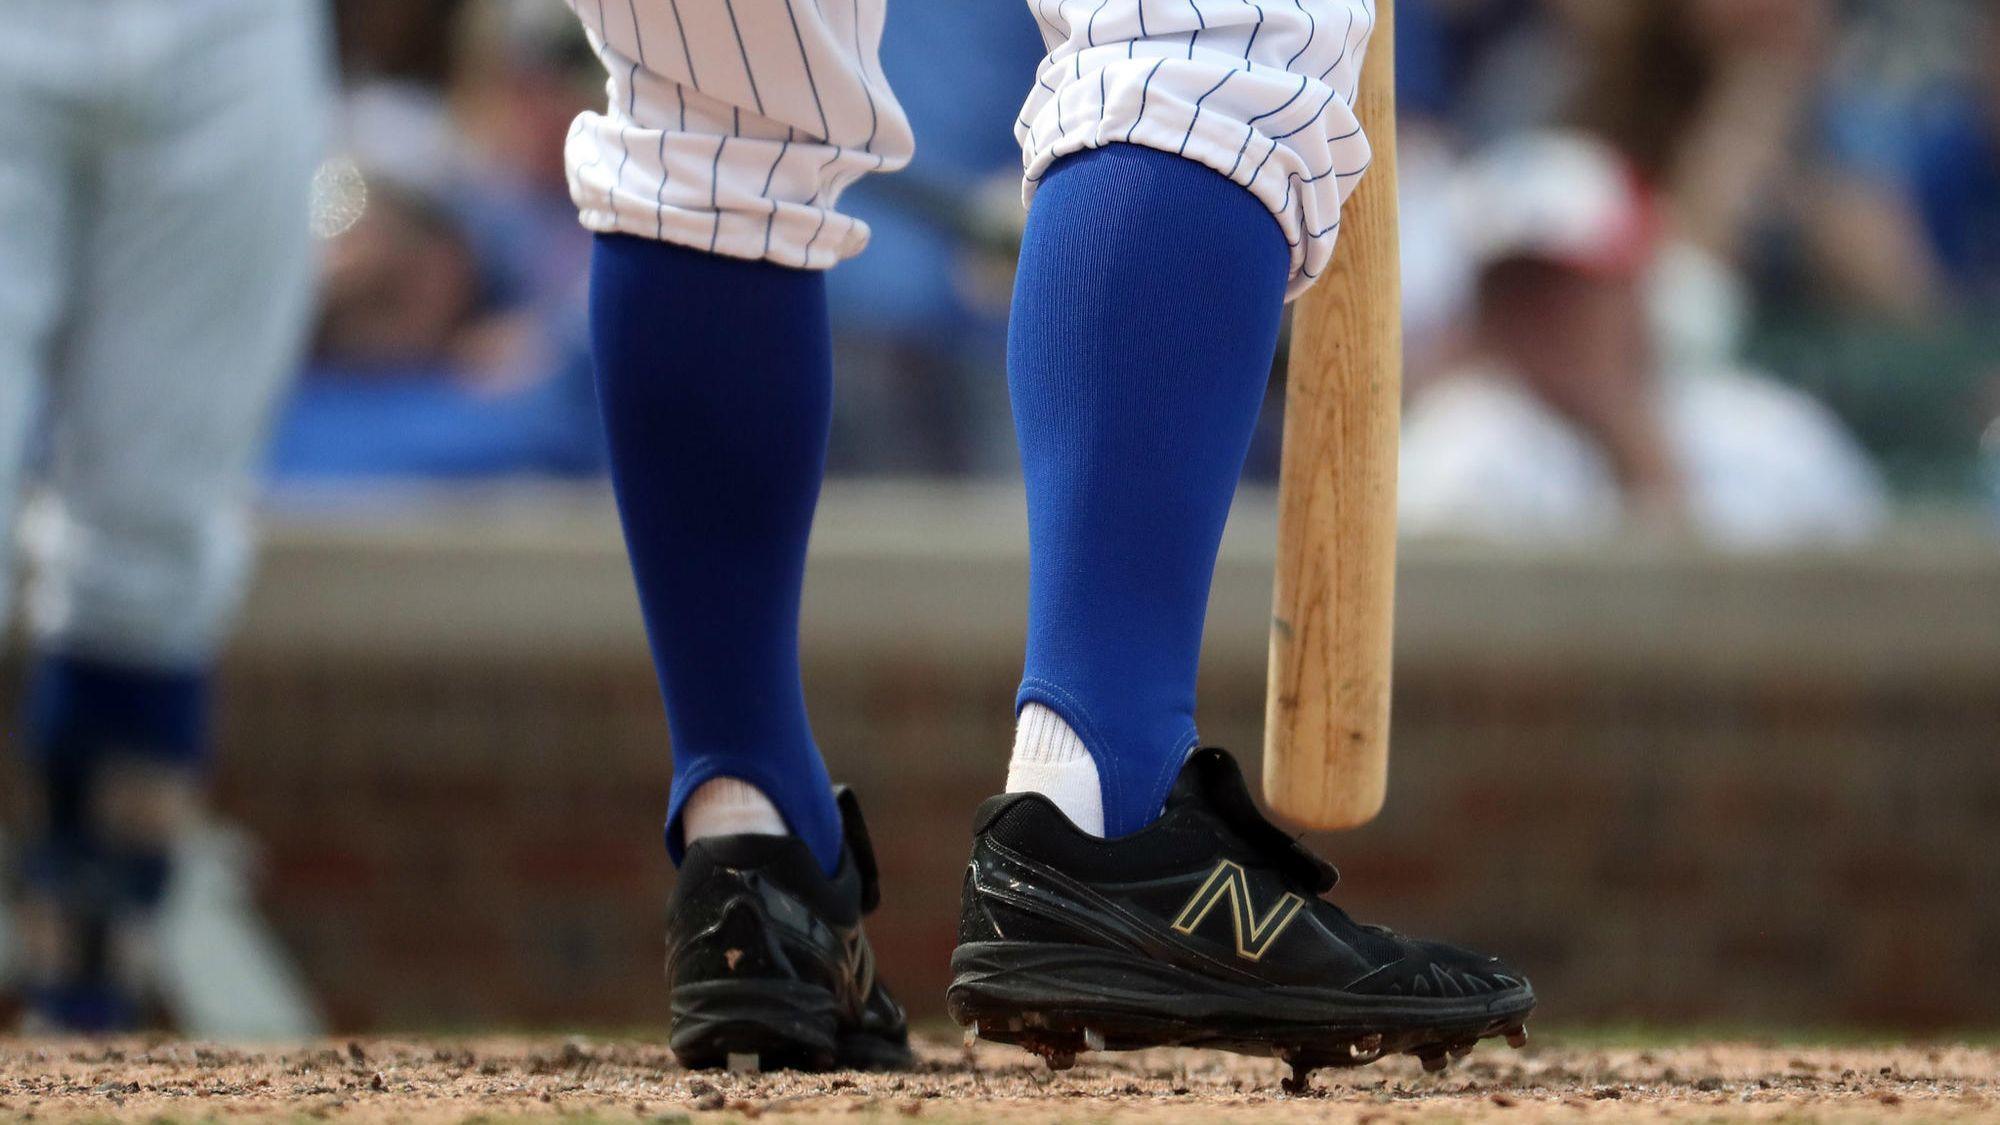 Ben Zobrist clearly hates America for wearing black cleats